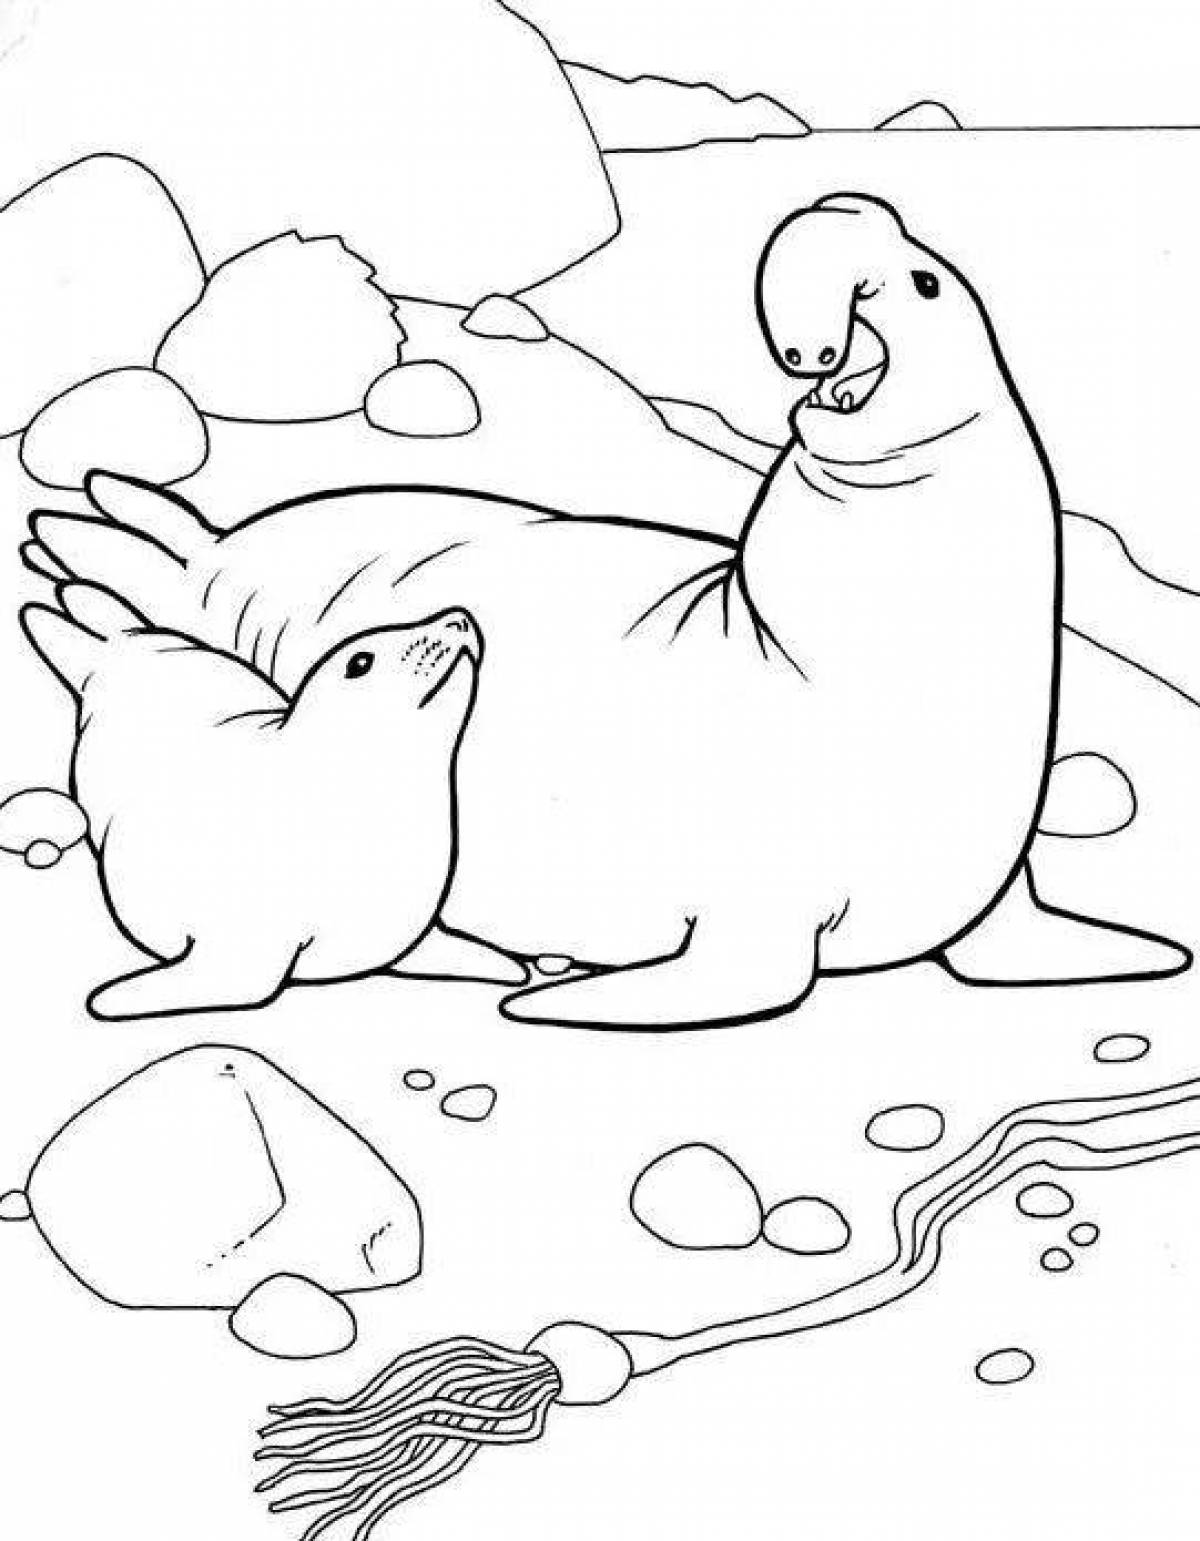 Vibrant elephant seal coloring page